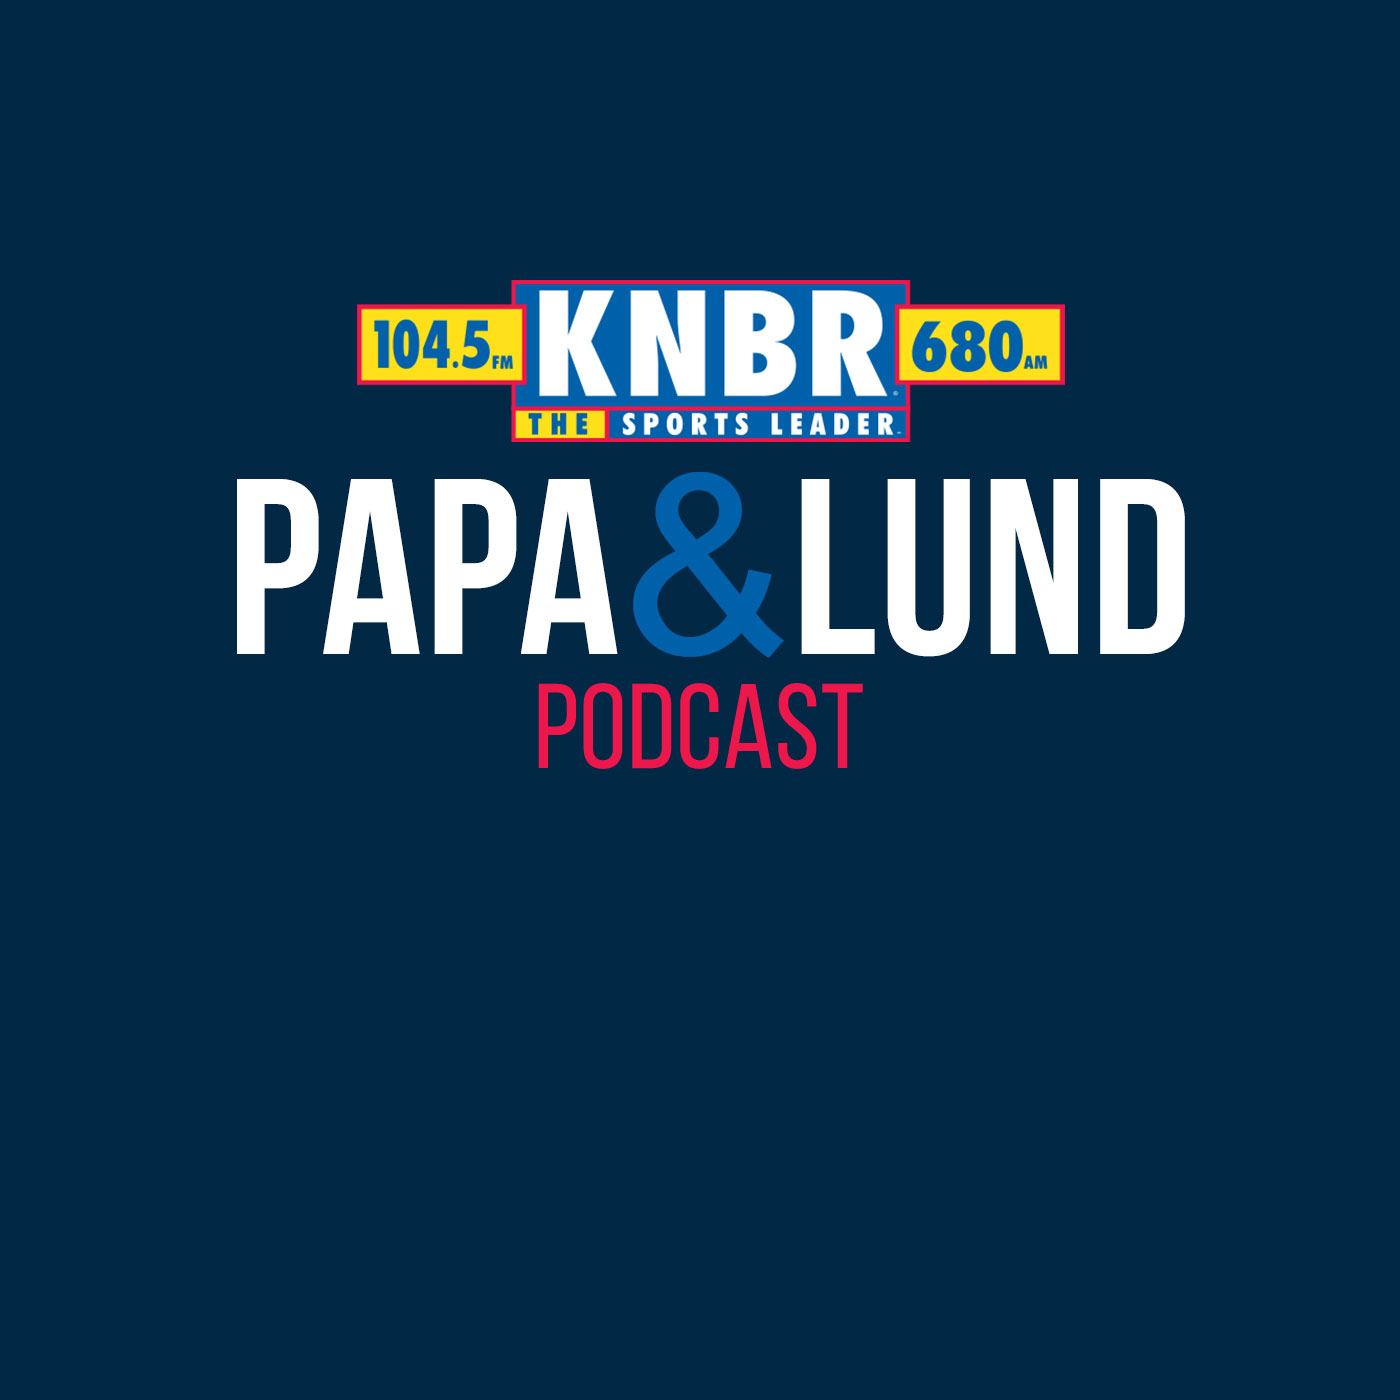 2-6 Brandon Payne breaks down Steph Curry's injury and discusses a possible timetable for his return with Papa & Lund